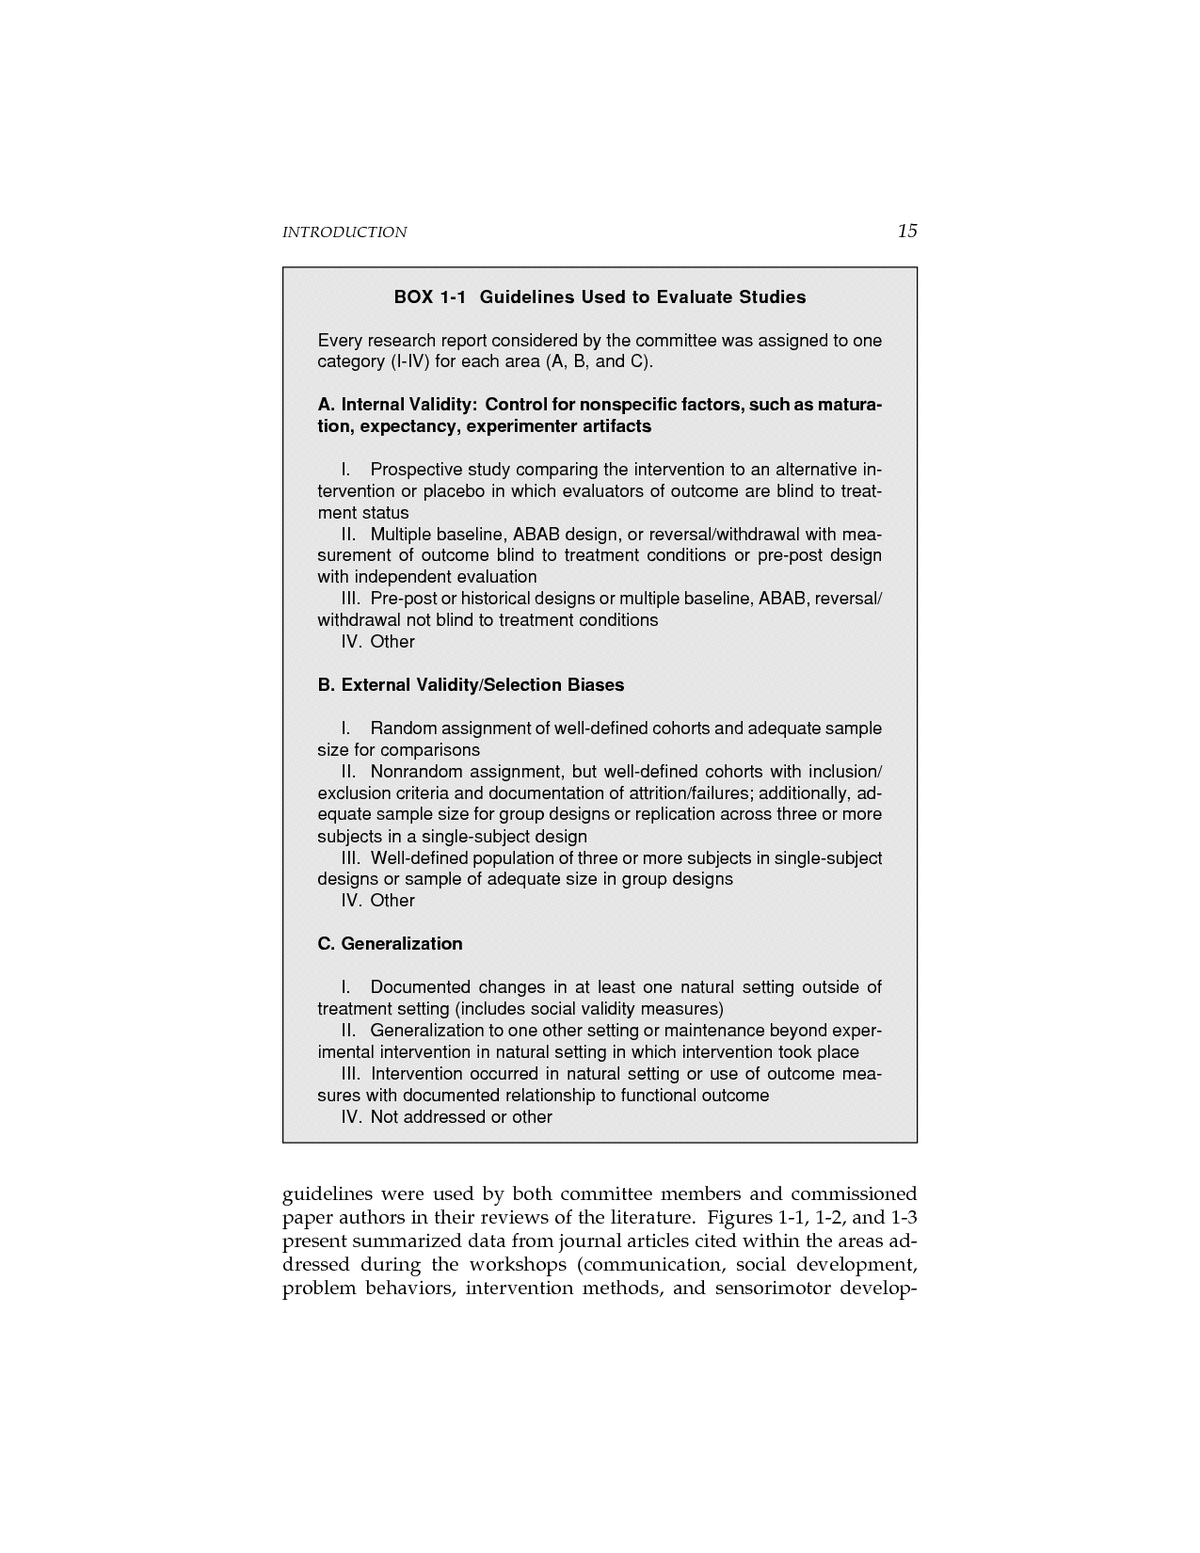 Реферат: Autism Essay Research Paper Autism Throughout the